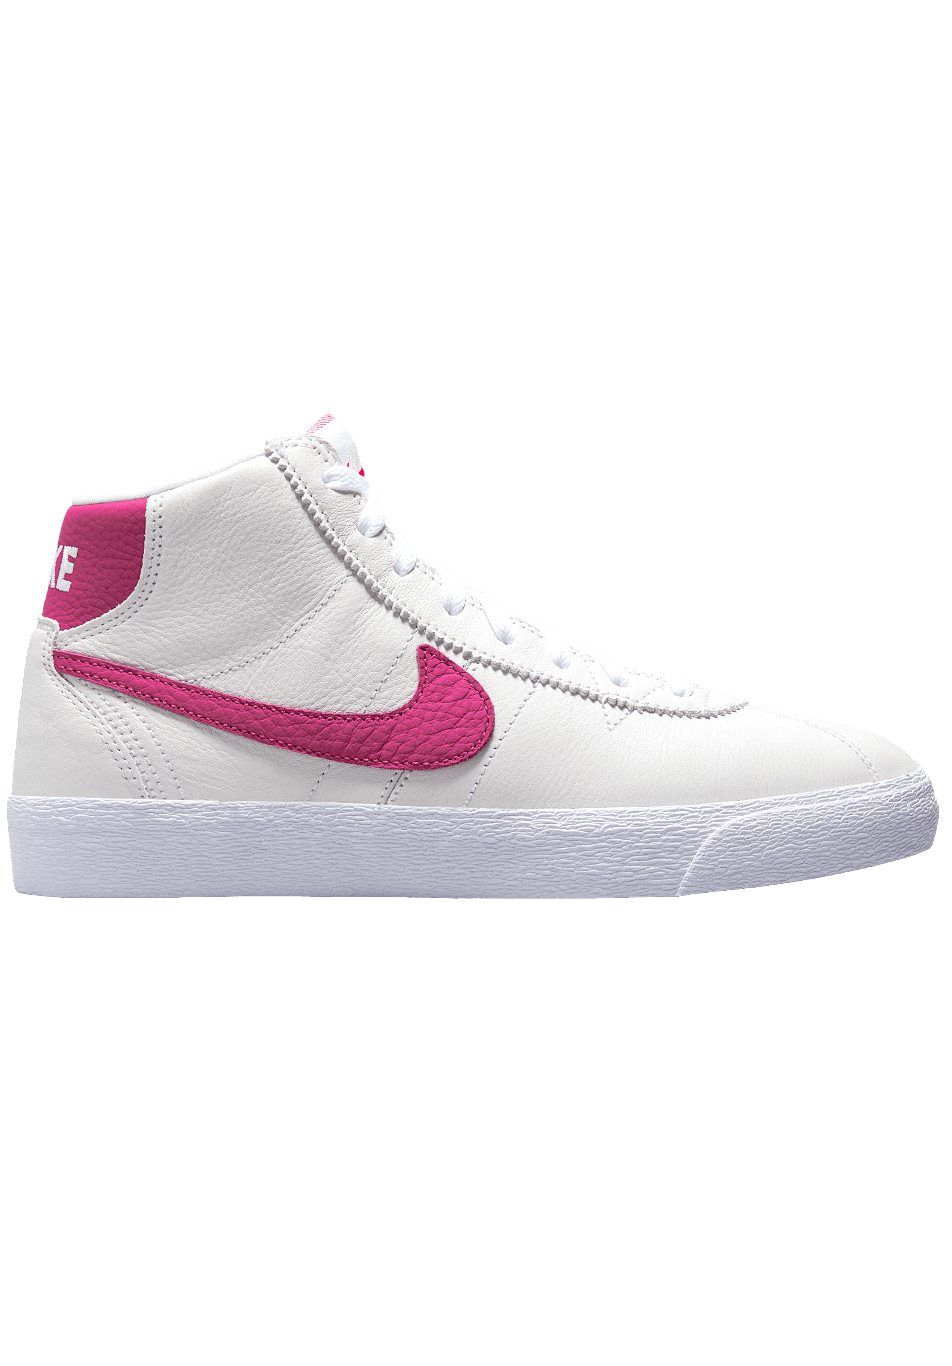 Nike SB Bruin Hi WMNS Shoes White Sweet Beet ONLINE ONLY